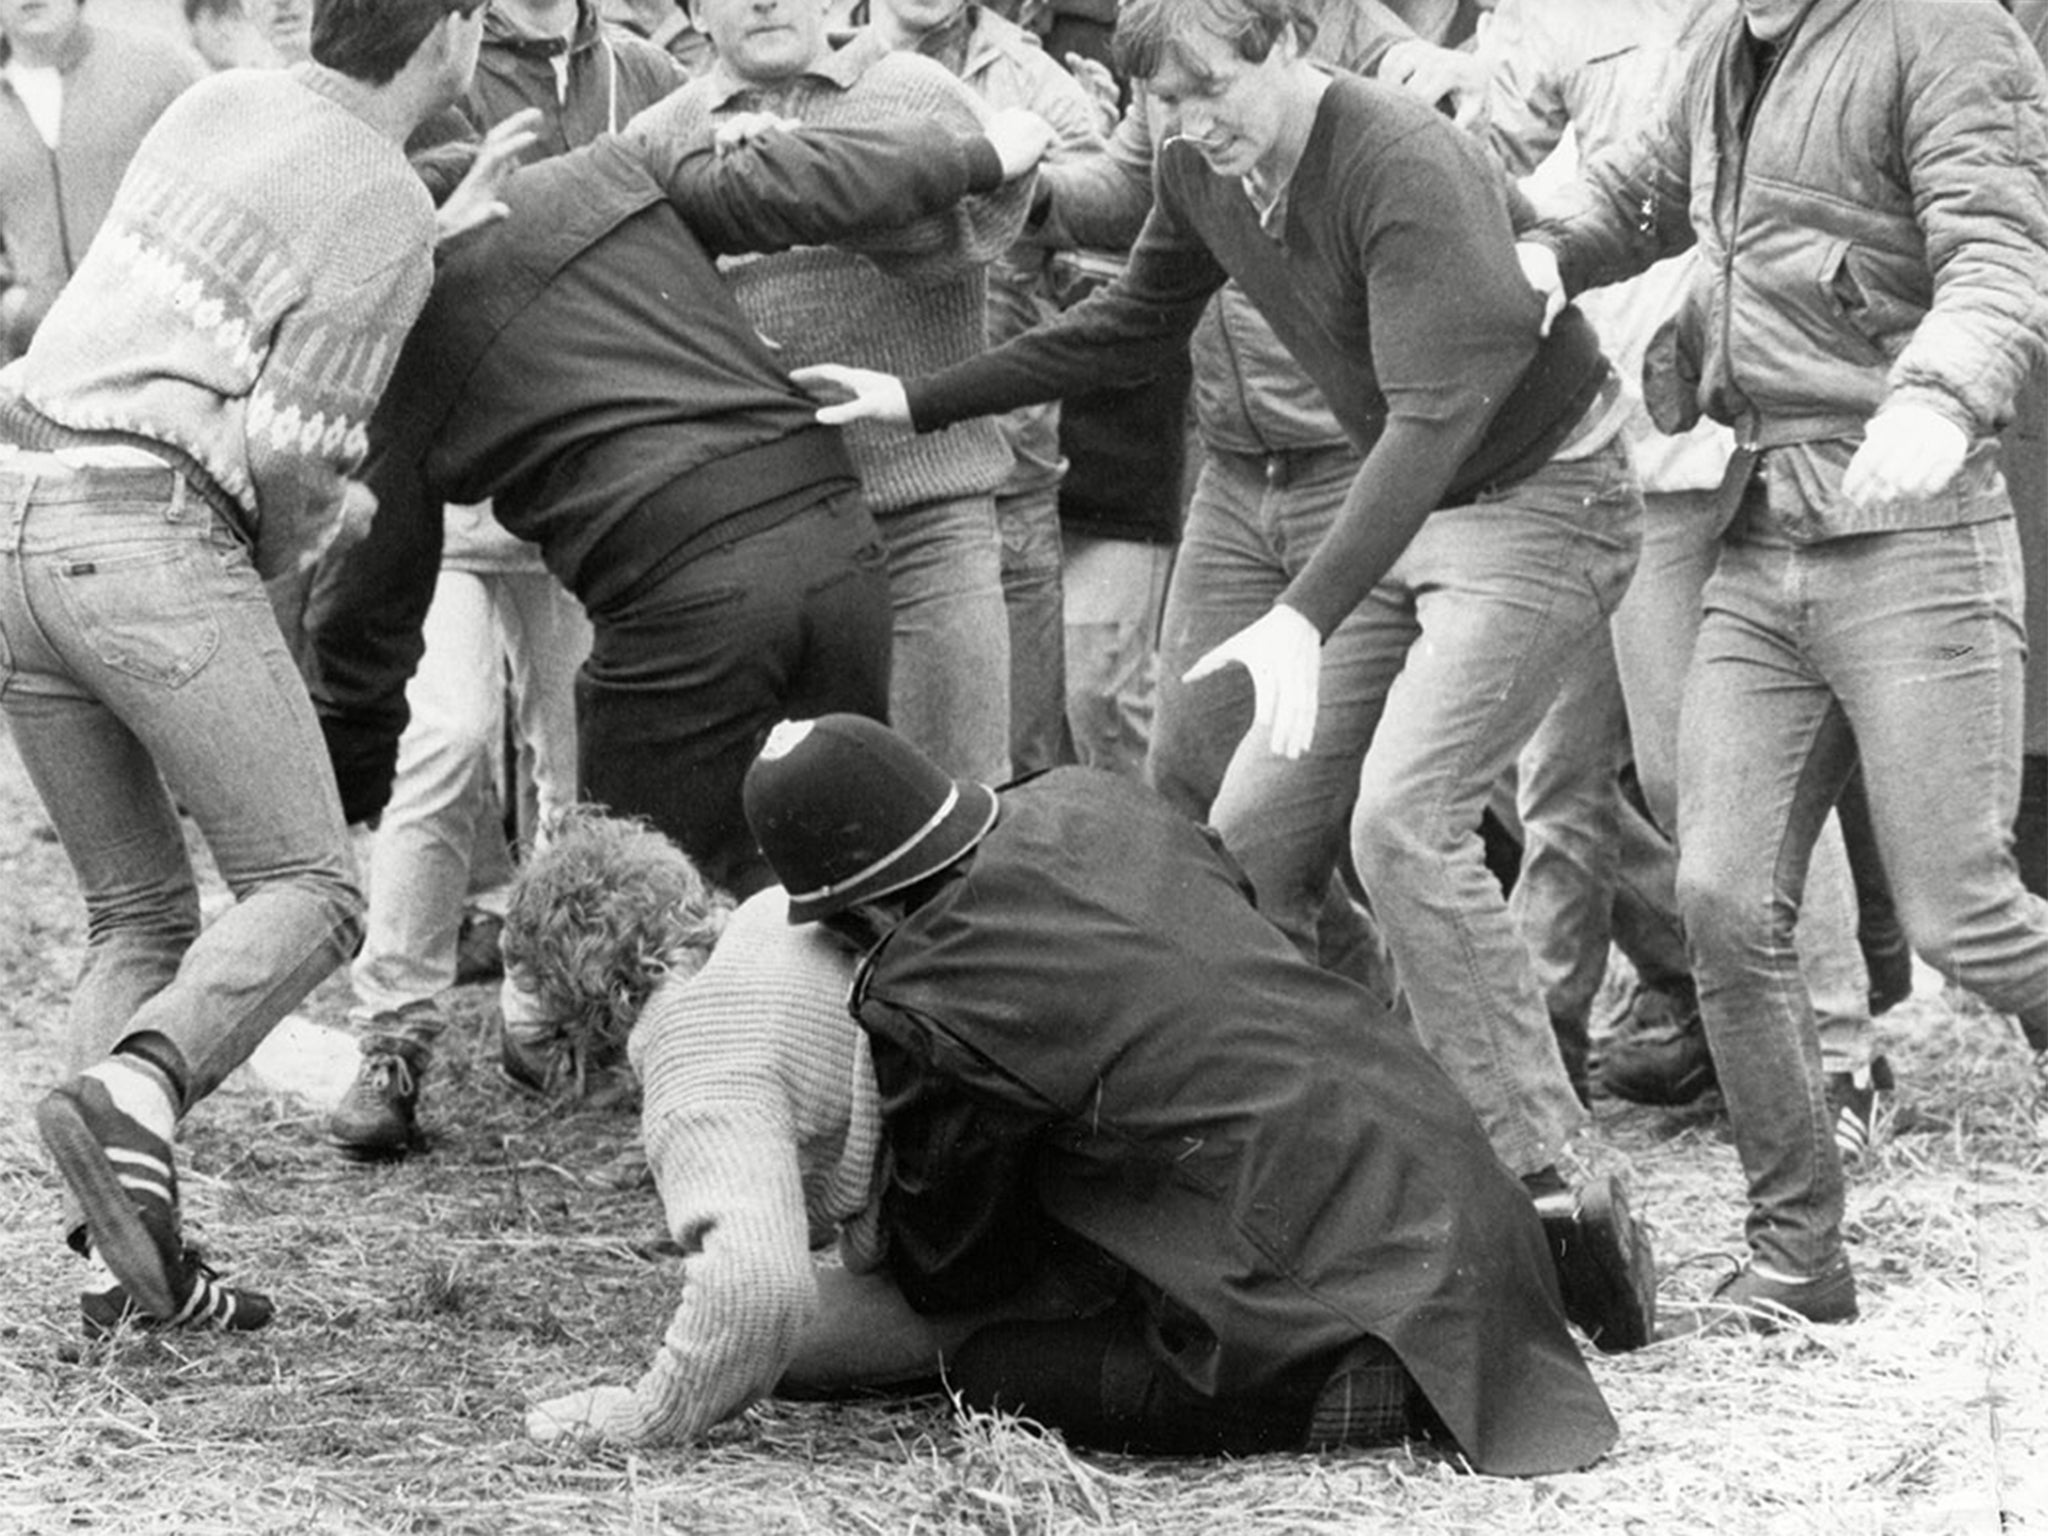 A police officer wrestles a miner to the ground during the 'Battle of Orgreave'